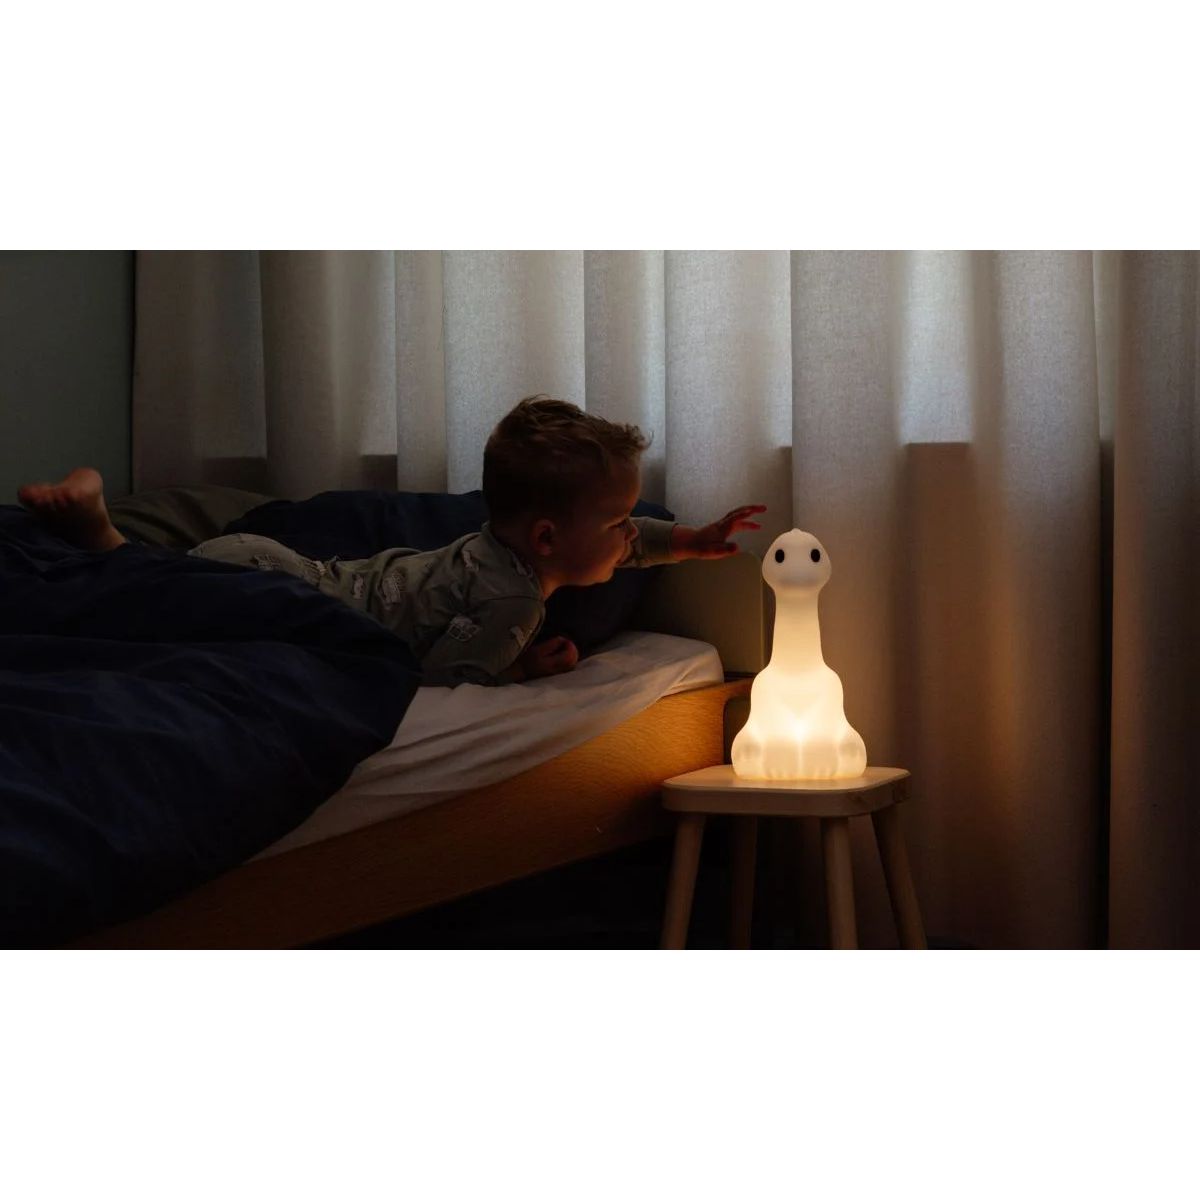 Dino First Light by Mr Maria - Dimmable & Rechargeable Light for Kids